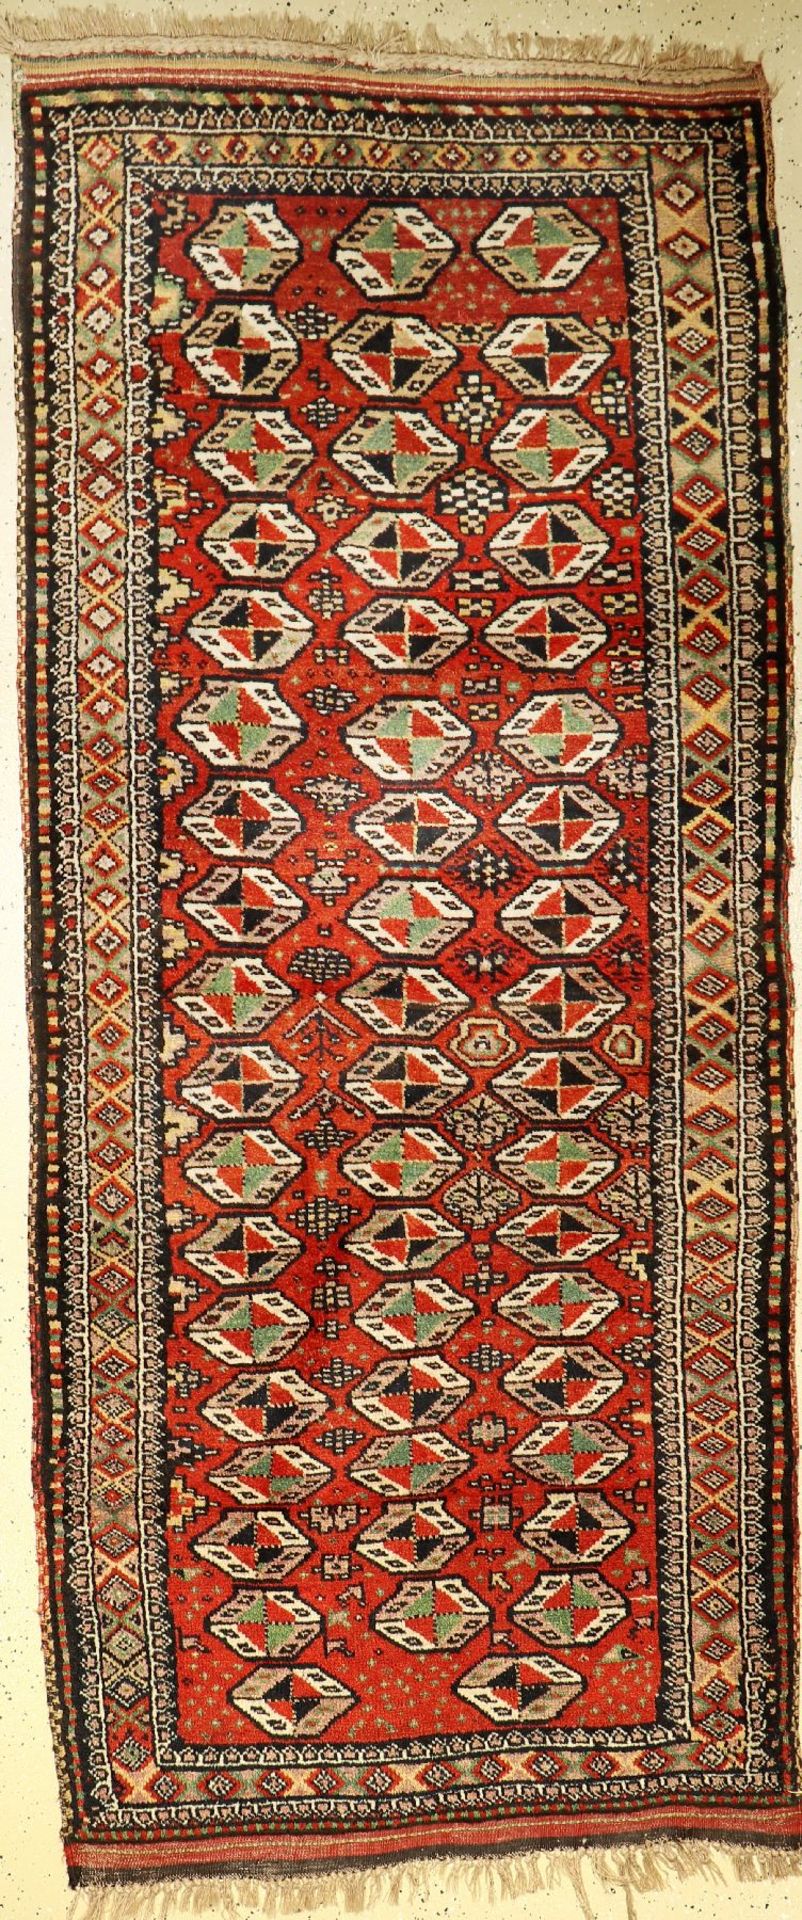 Kordi old, Persia, around 1920, wool on wool, approx. 250 x 107 cm, condition: 2-3. Auction:Antique,